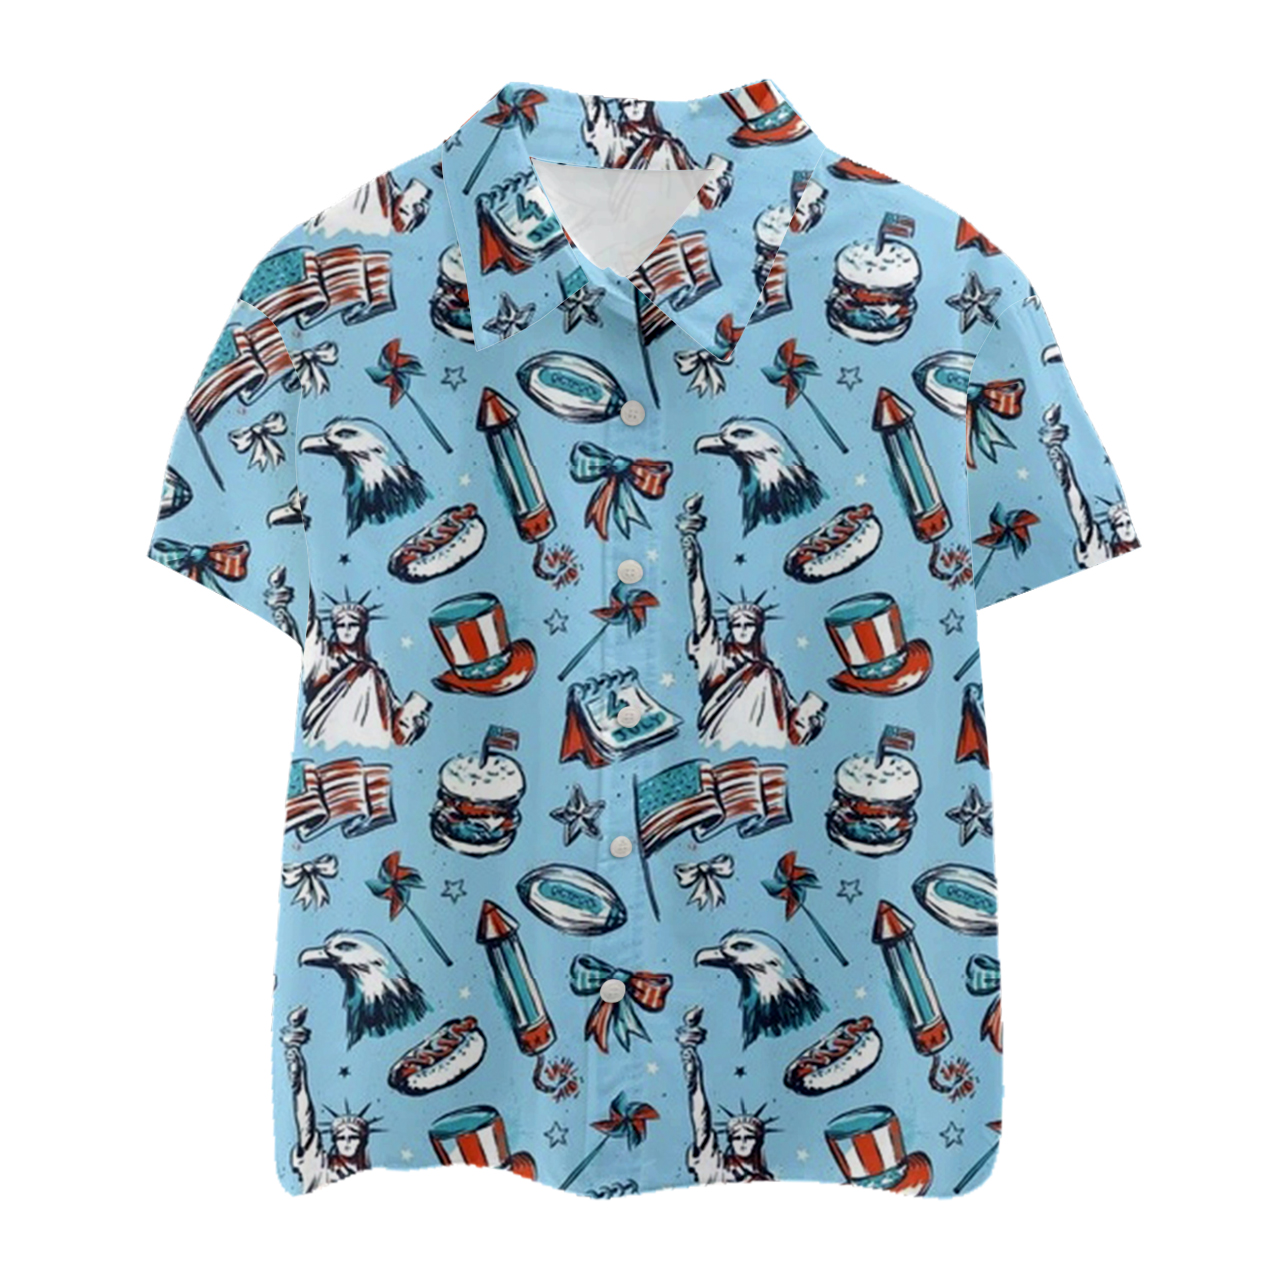 Independence Day Statue Of Liberty Kids Button Shirt